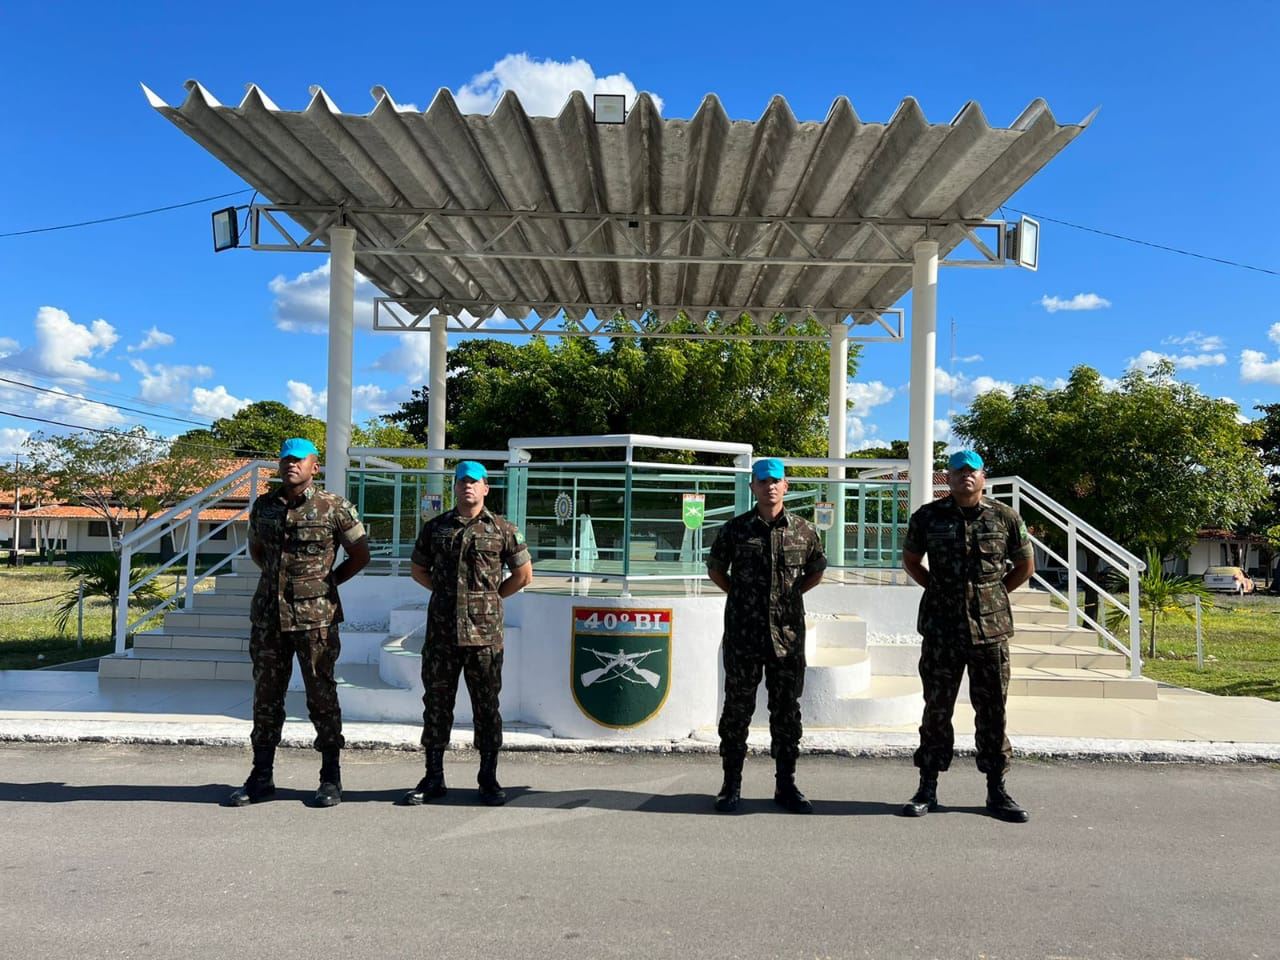 From July 11 to 15, a Mobile Training Team from the Brazilian Joint Center for Peace Operations (CCOPAB) traveled to the city of Crateús to conduct the Training of Trainers to the military of the 40th Infantry Battalion (40th BI), with the participation of 20 students.